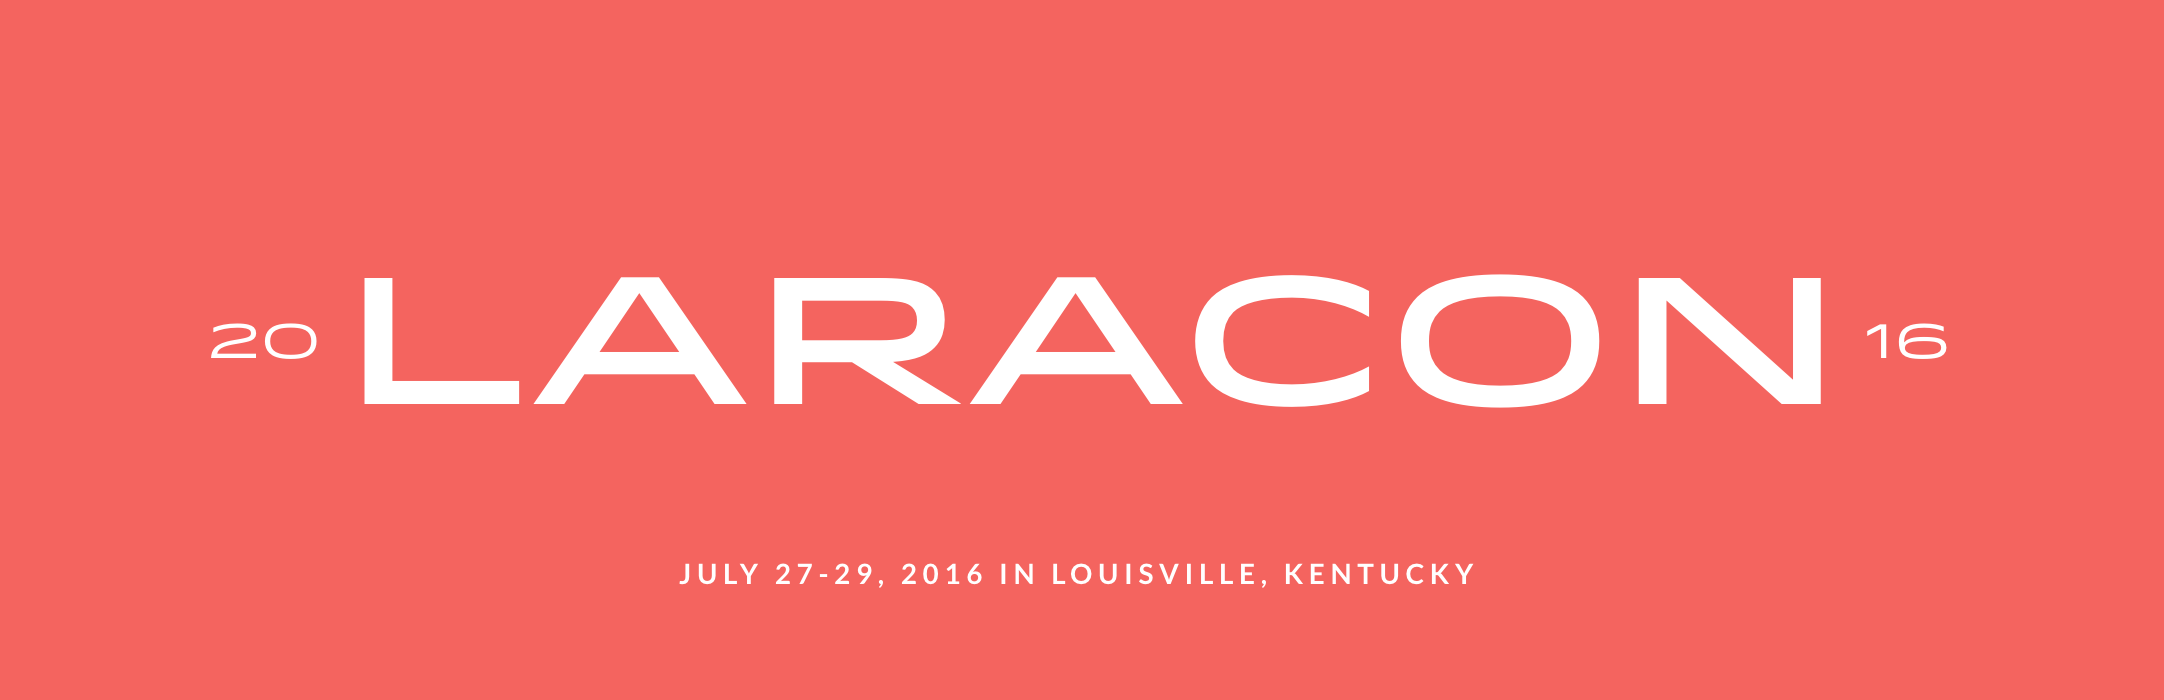 Laracon tickets are now on sale image